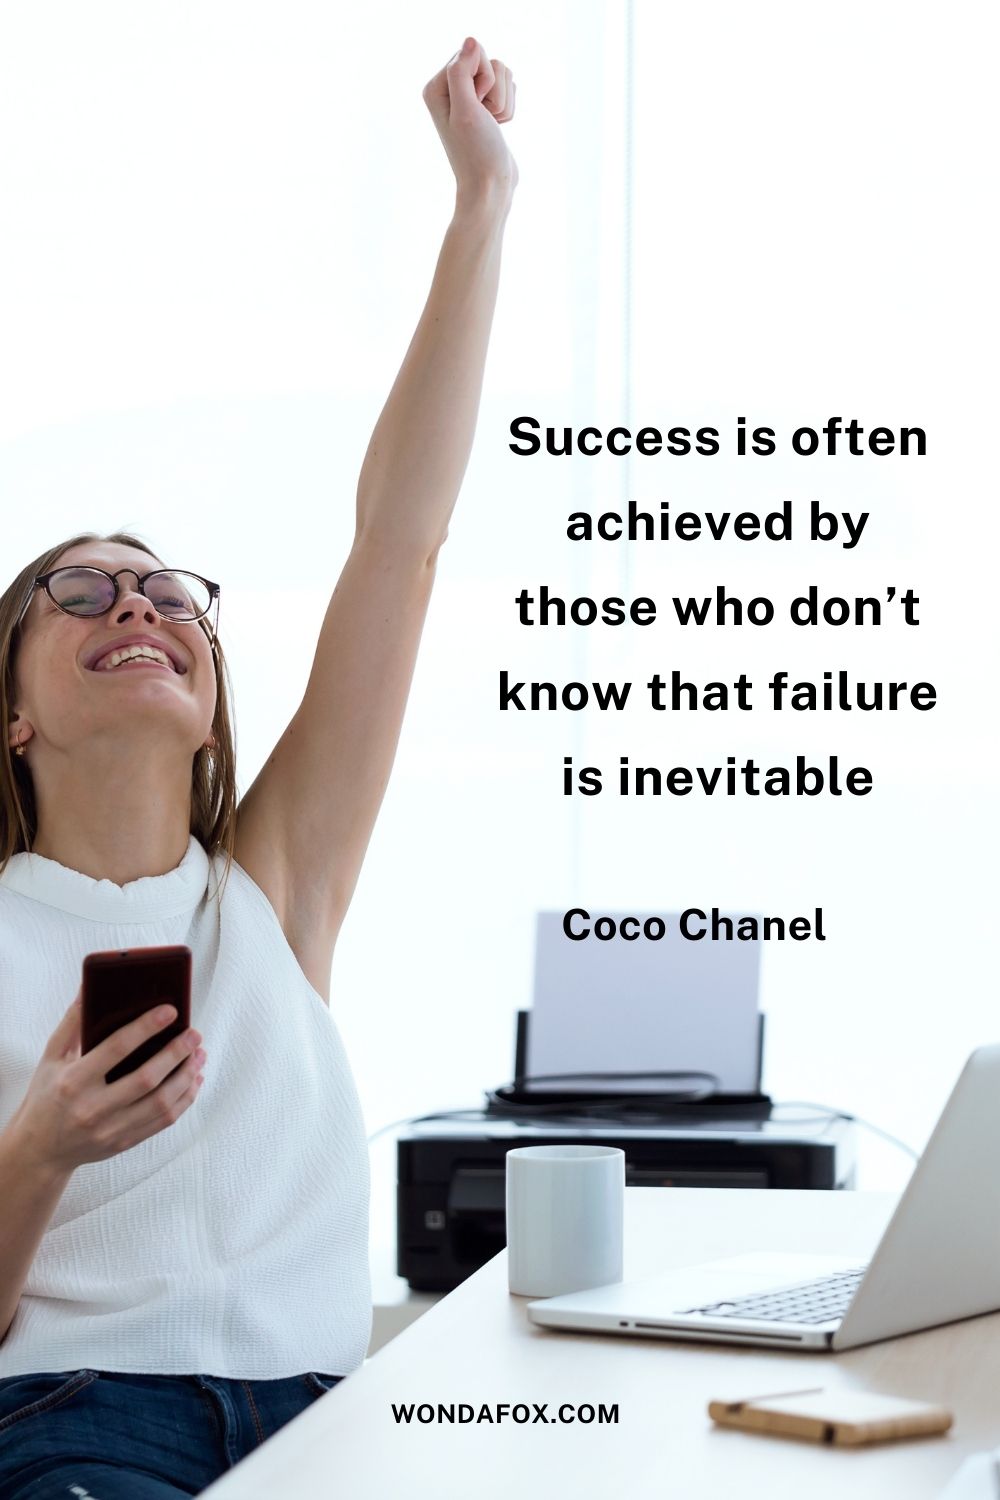 Success if often achieved by those who don’t know that failure is inevitable